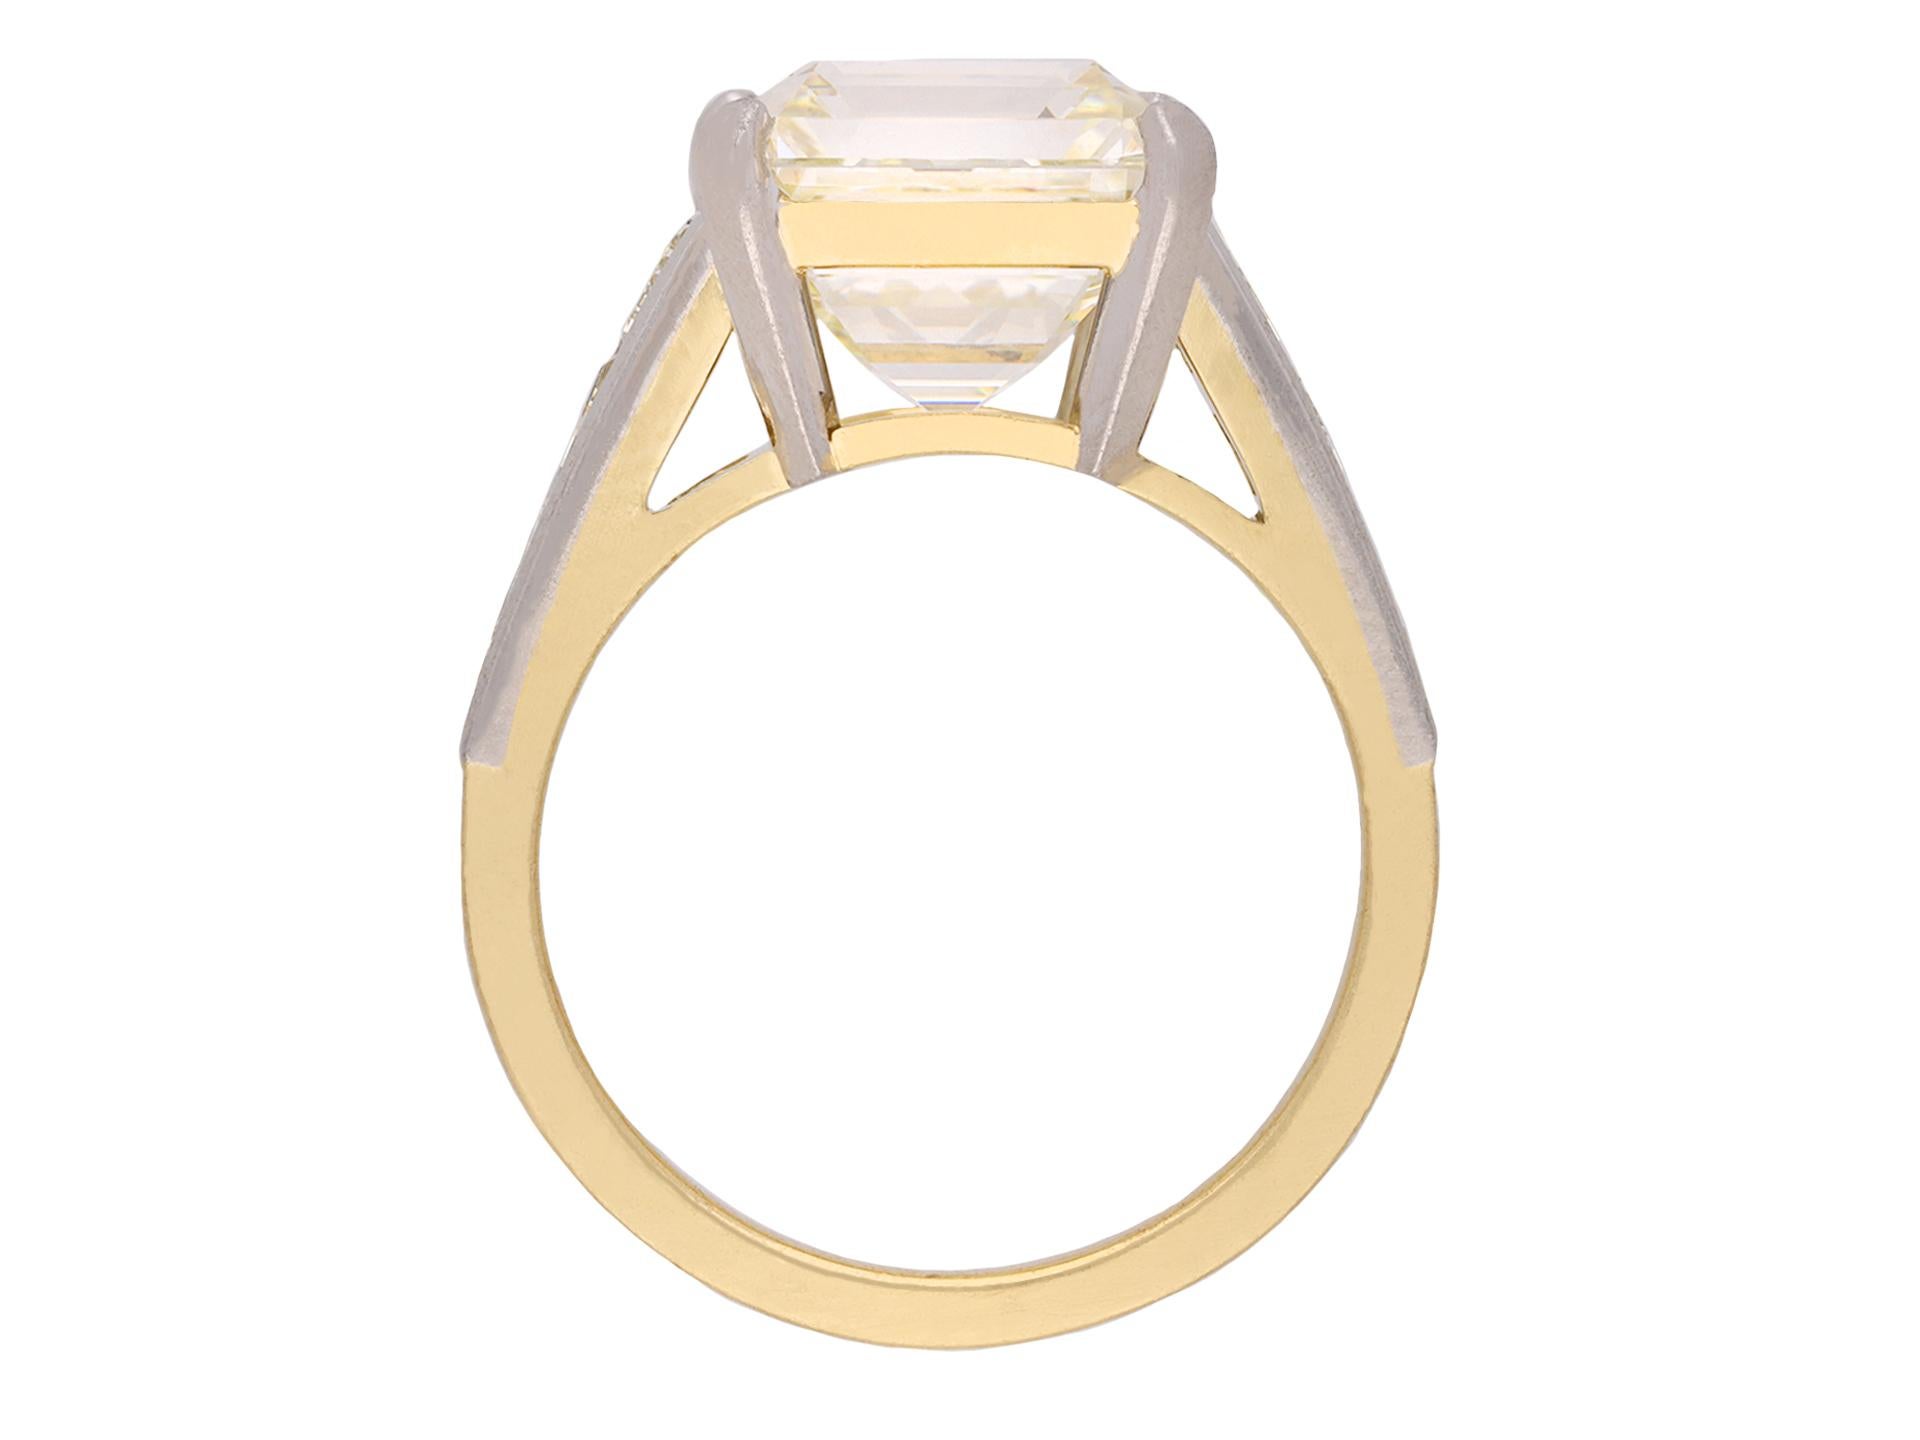 Emerald Cut Emerald-Cut 6.95 Carat GIA Diamond Flanked Solitaire Ring, circa 1970 For Sale